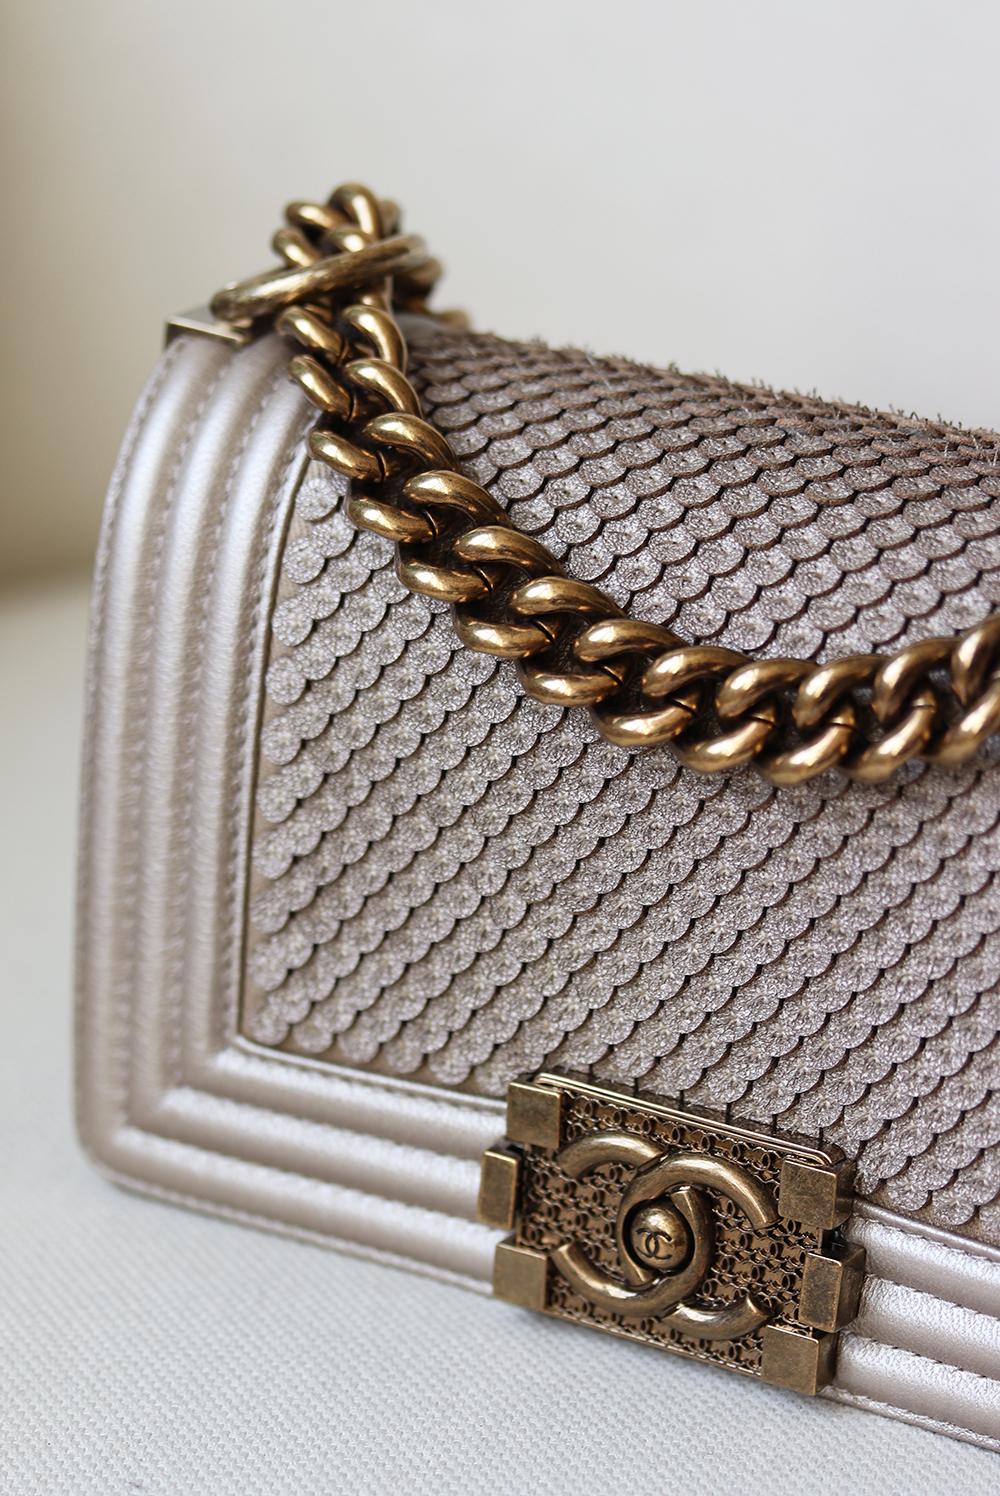 Chanel Metallic Lambskin Boy Crossbody Bag has been hand-finished by skilled artisans in the label's workshop.
Boasting a textured scaled lambskin exterior, this design is accented with gold-toned and metallic calfskin chain strap.
Made in France